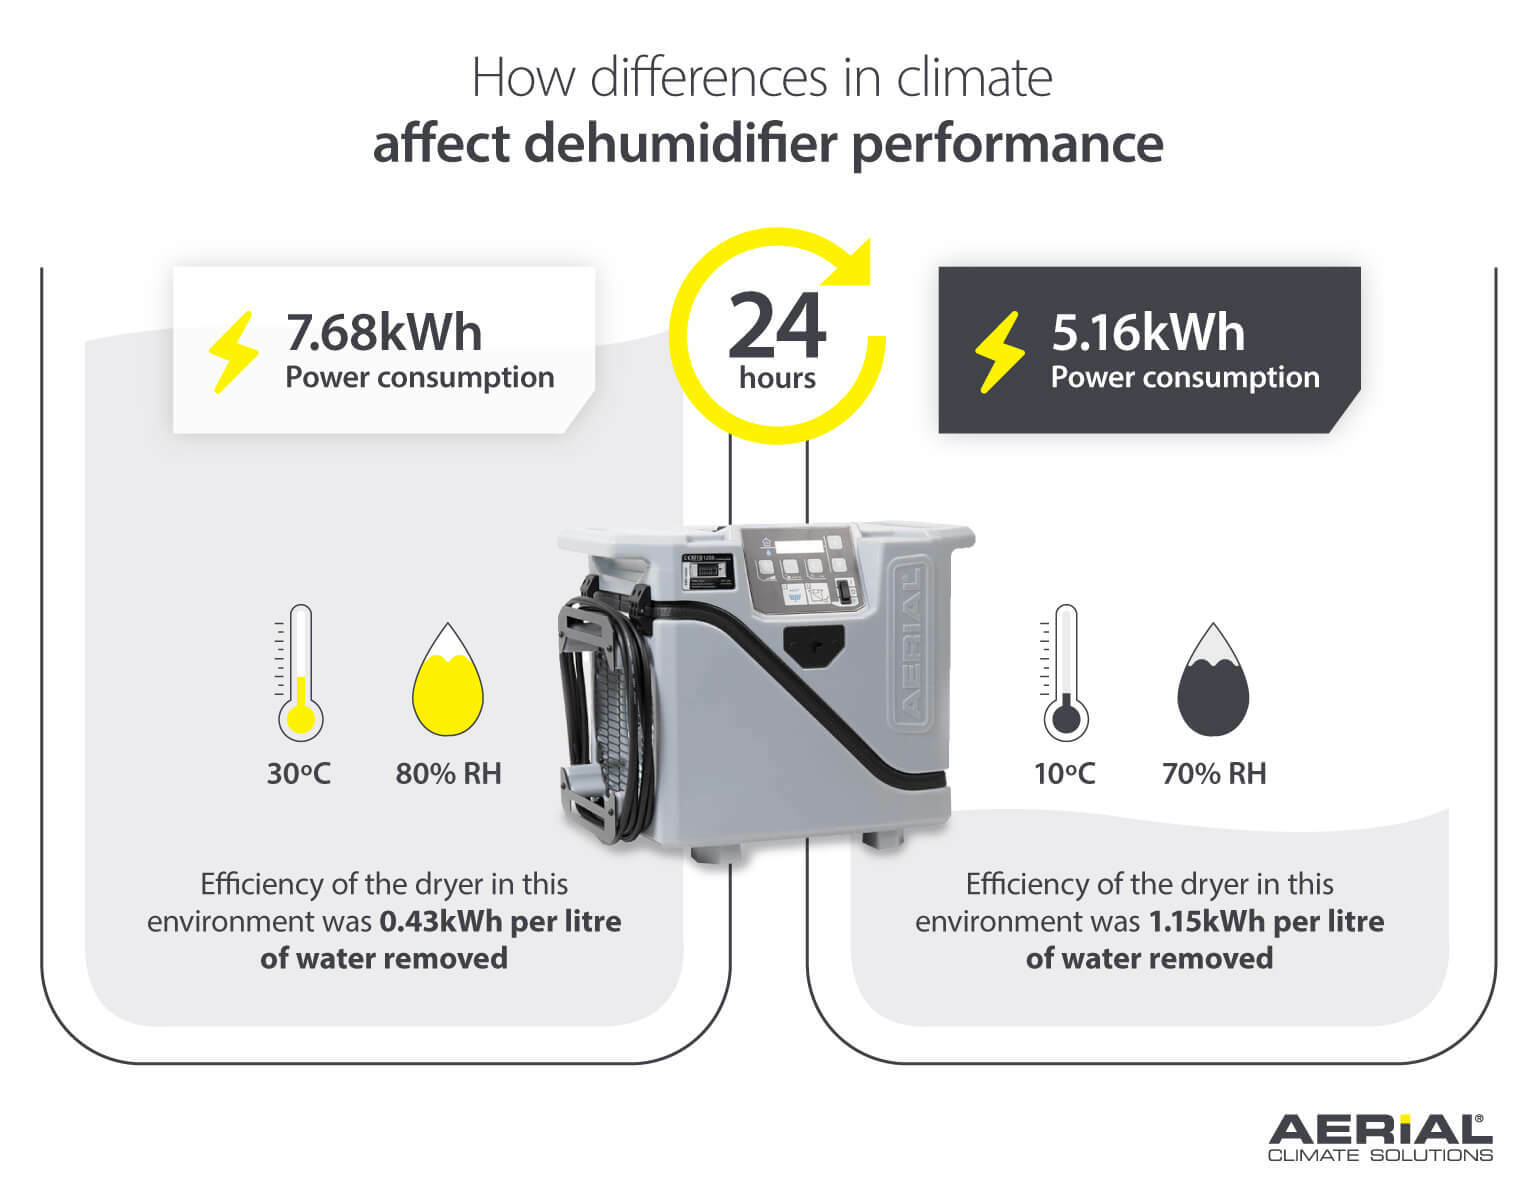 How dehumidifier performance is affected by climate and temperature - Infographic image